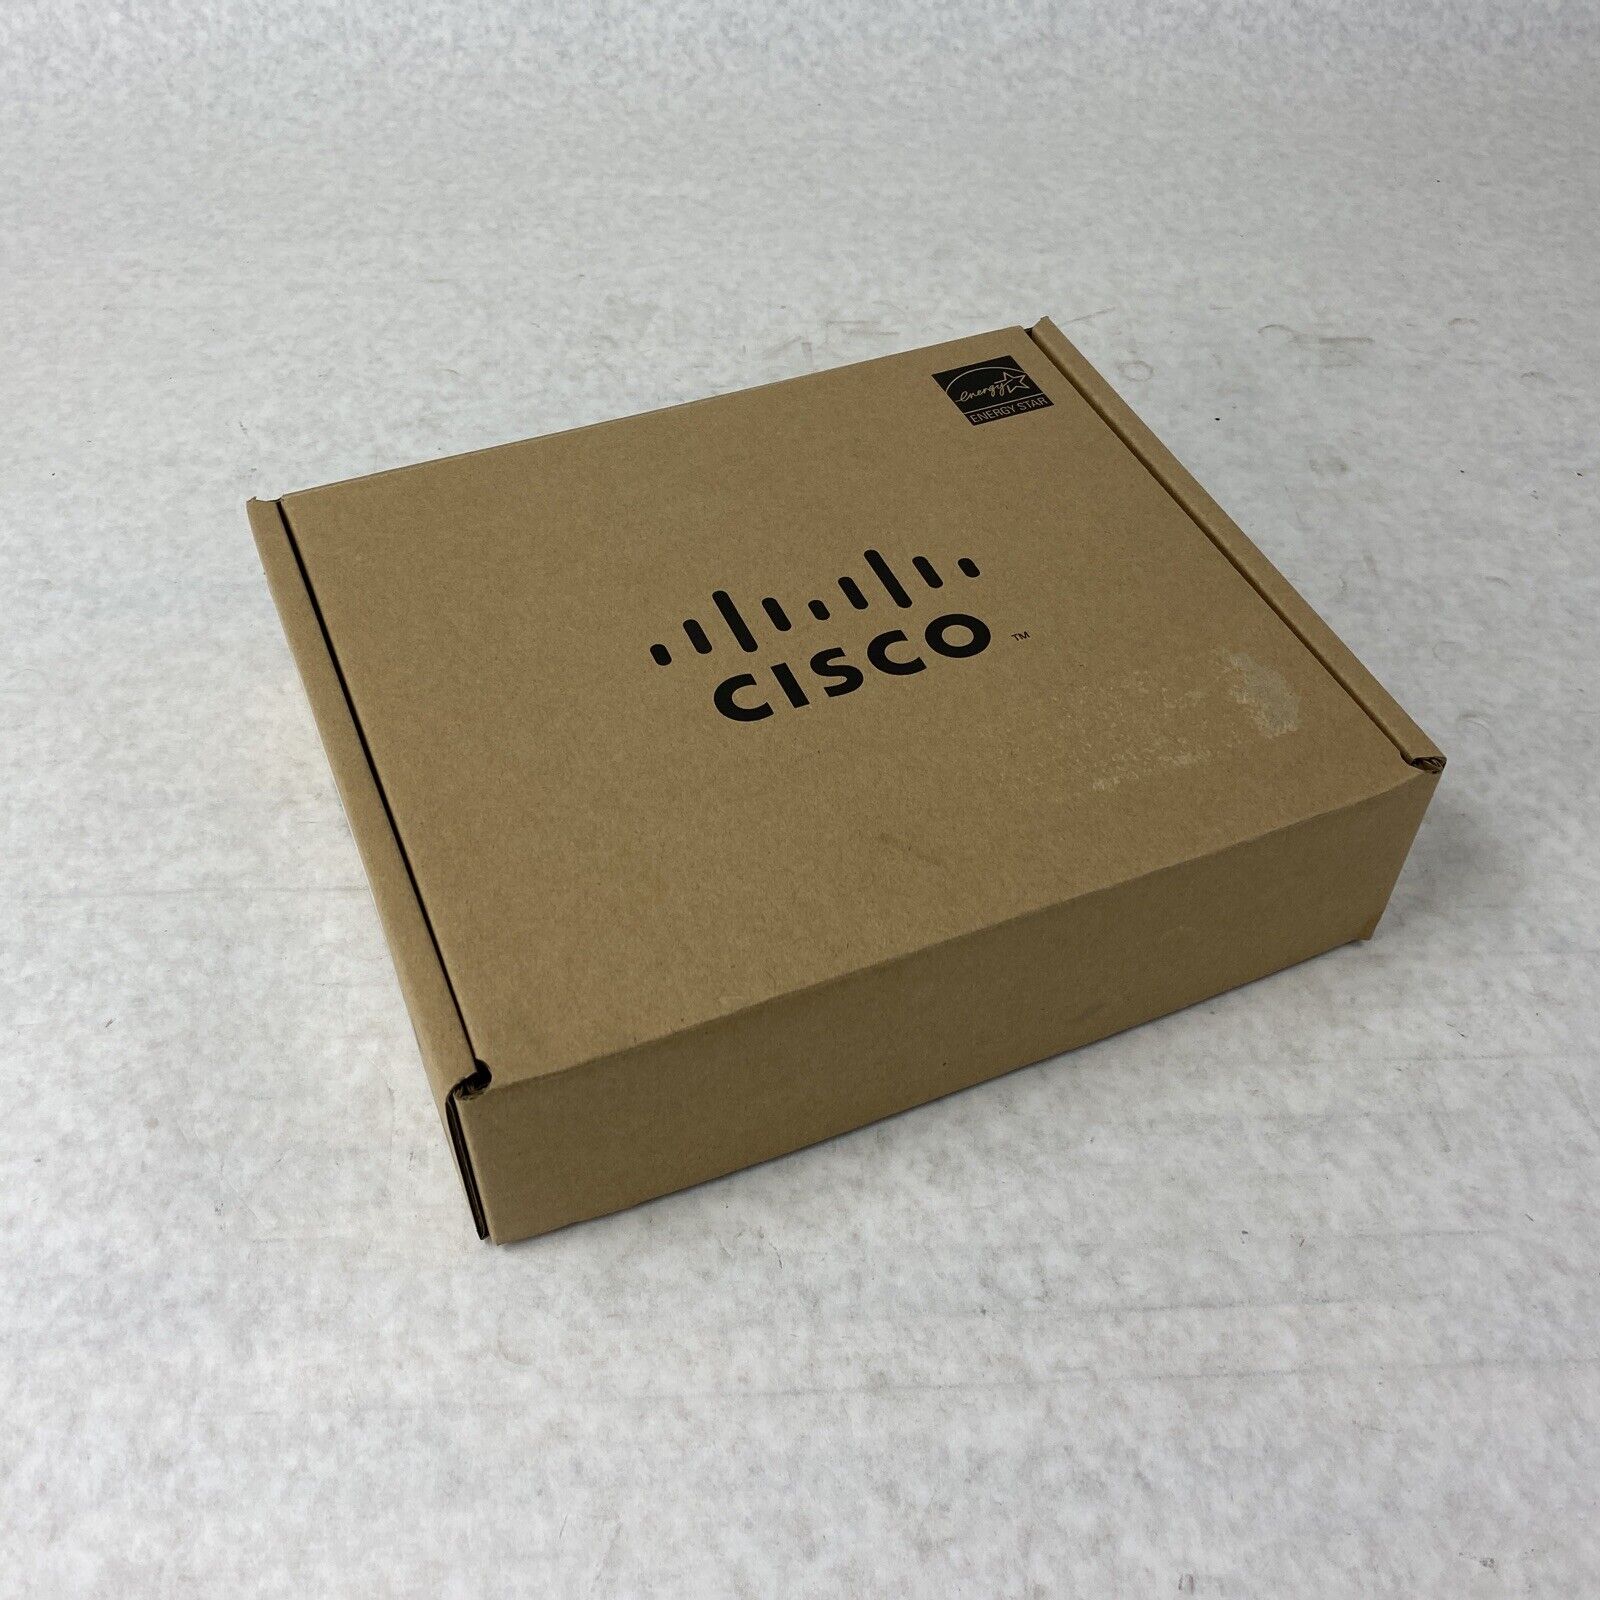 New Cisco 7811 IP Phone for 3rd Party Call Control CP-7811-3PW-NA-K9